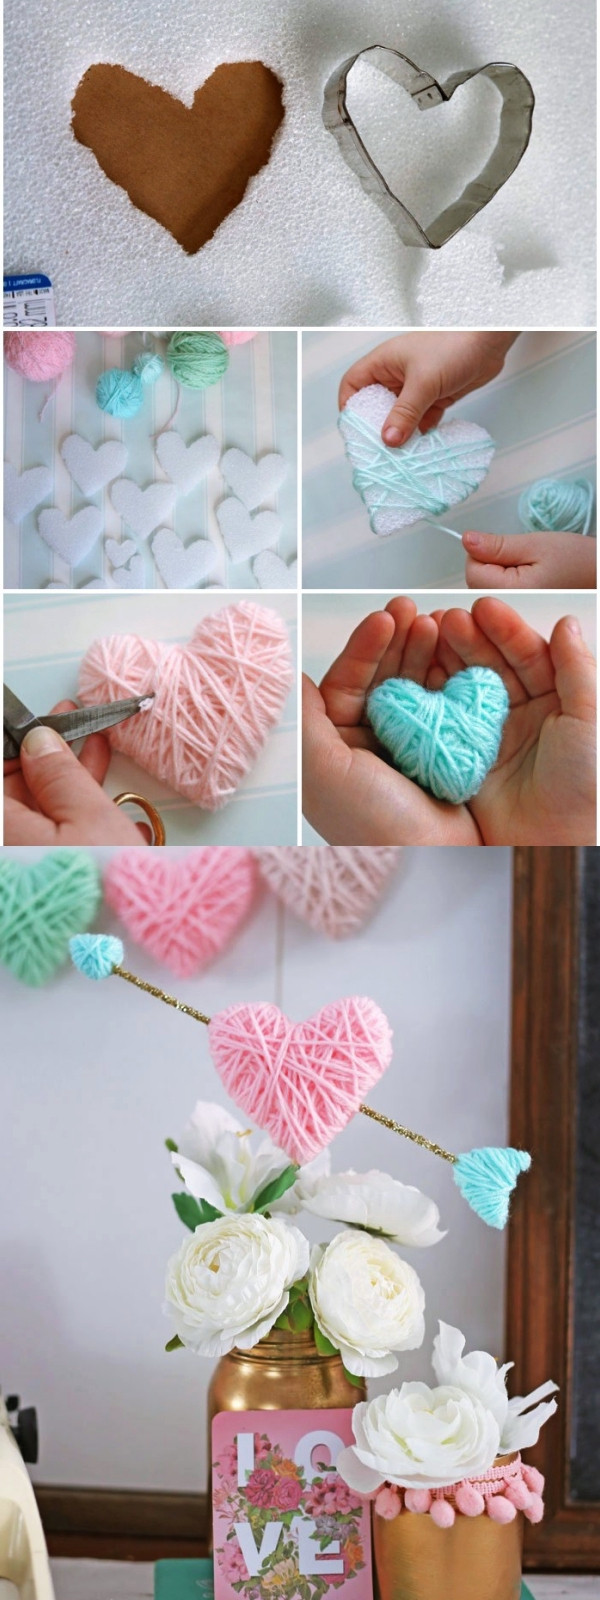 Romantic Gifts For Valentines Day
 30 Cute and Romantic Valentines Day Ideas for Him